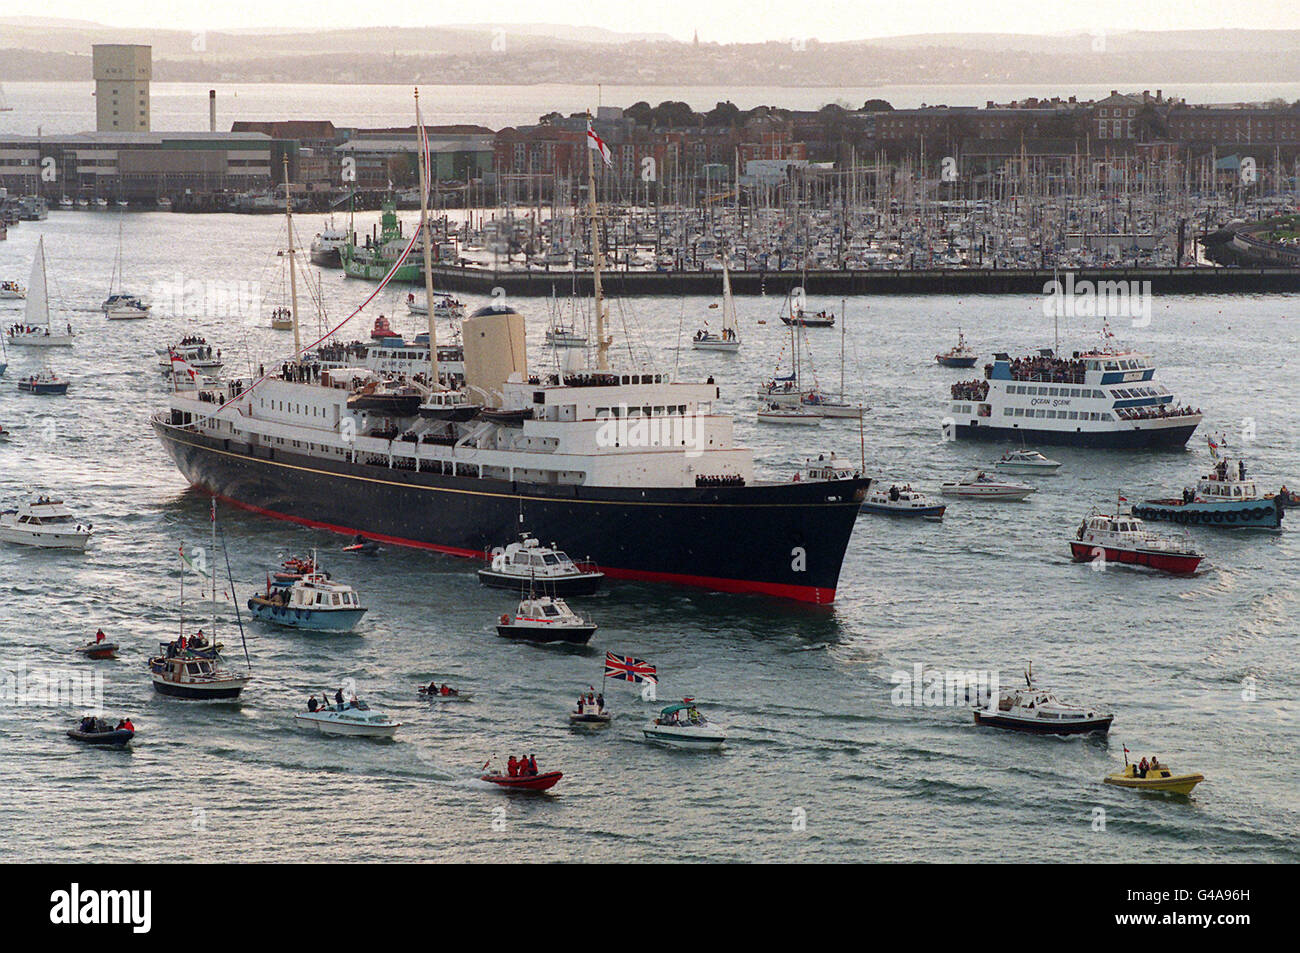 The Royal Yacht Britannia sails into Portsmouth today (Saturday) for the last time before she is decommissioned next month. Thousands of people lined the shore and gathered at the entrance to the harbour to witness the historic moment as the grand old lady of the seas arrived at the end of her farewell tour of Britain. Photo by Rebecca Naden/PA. See PA story ROYAL Yacht Stock Photo